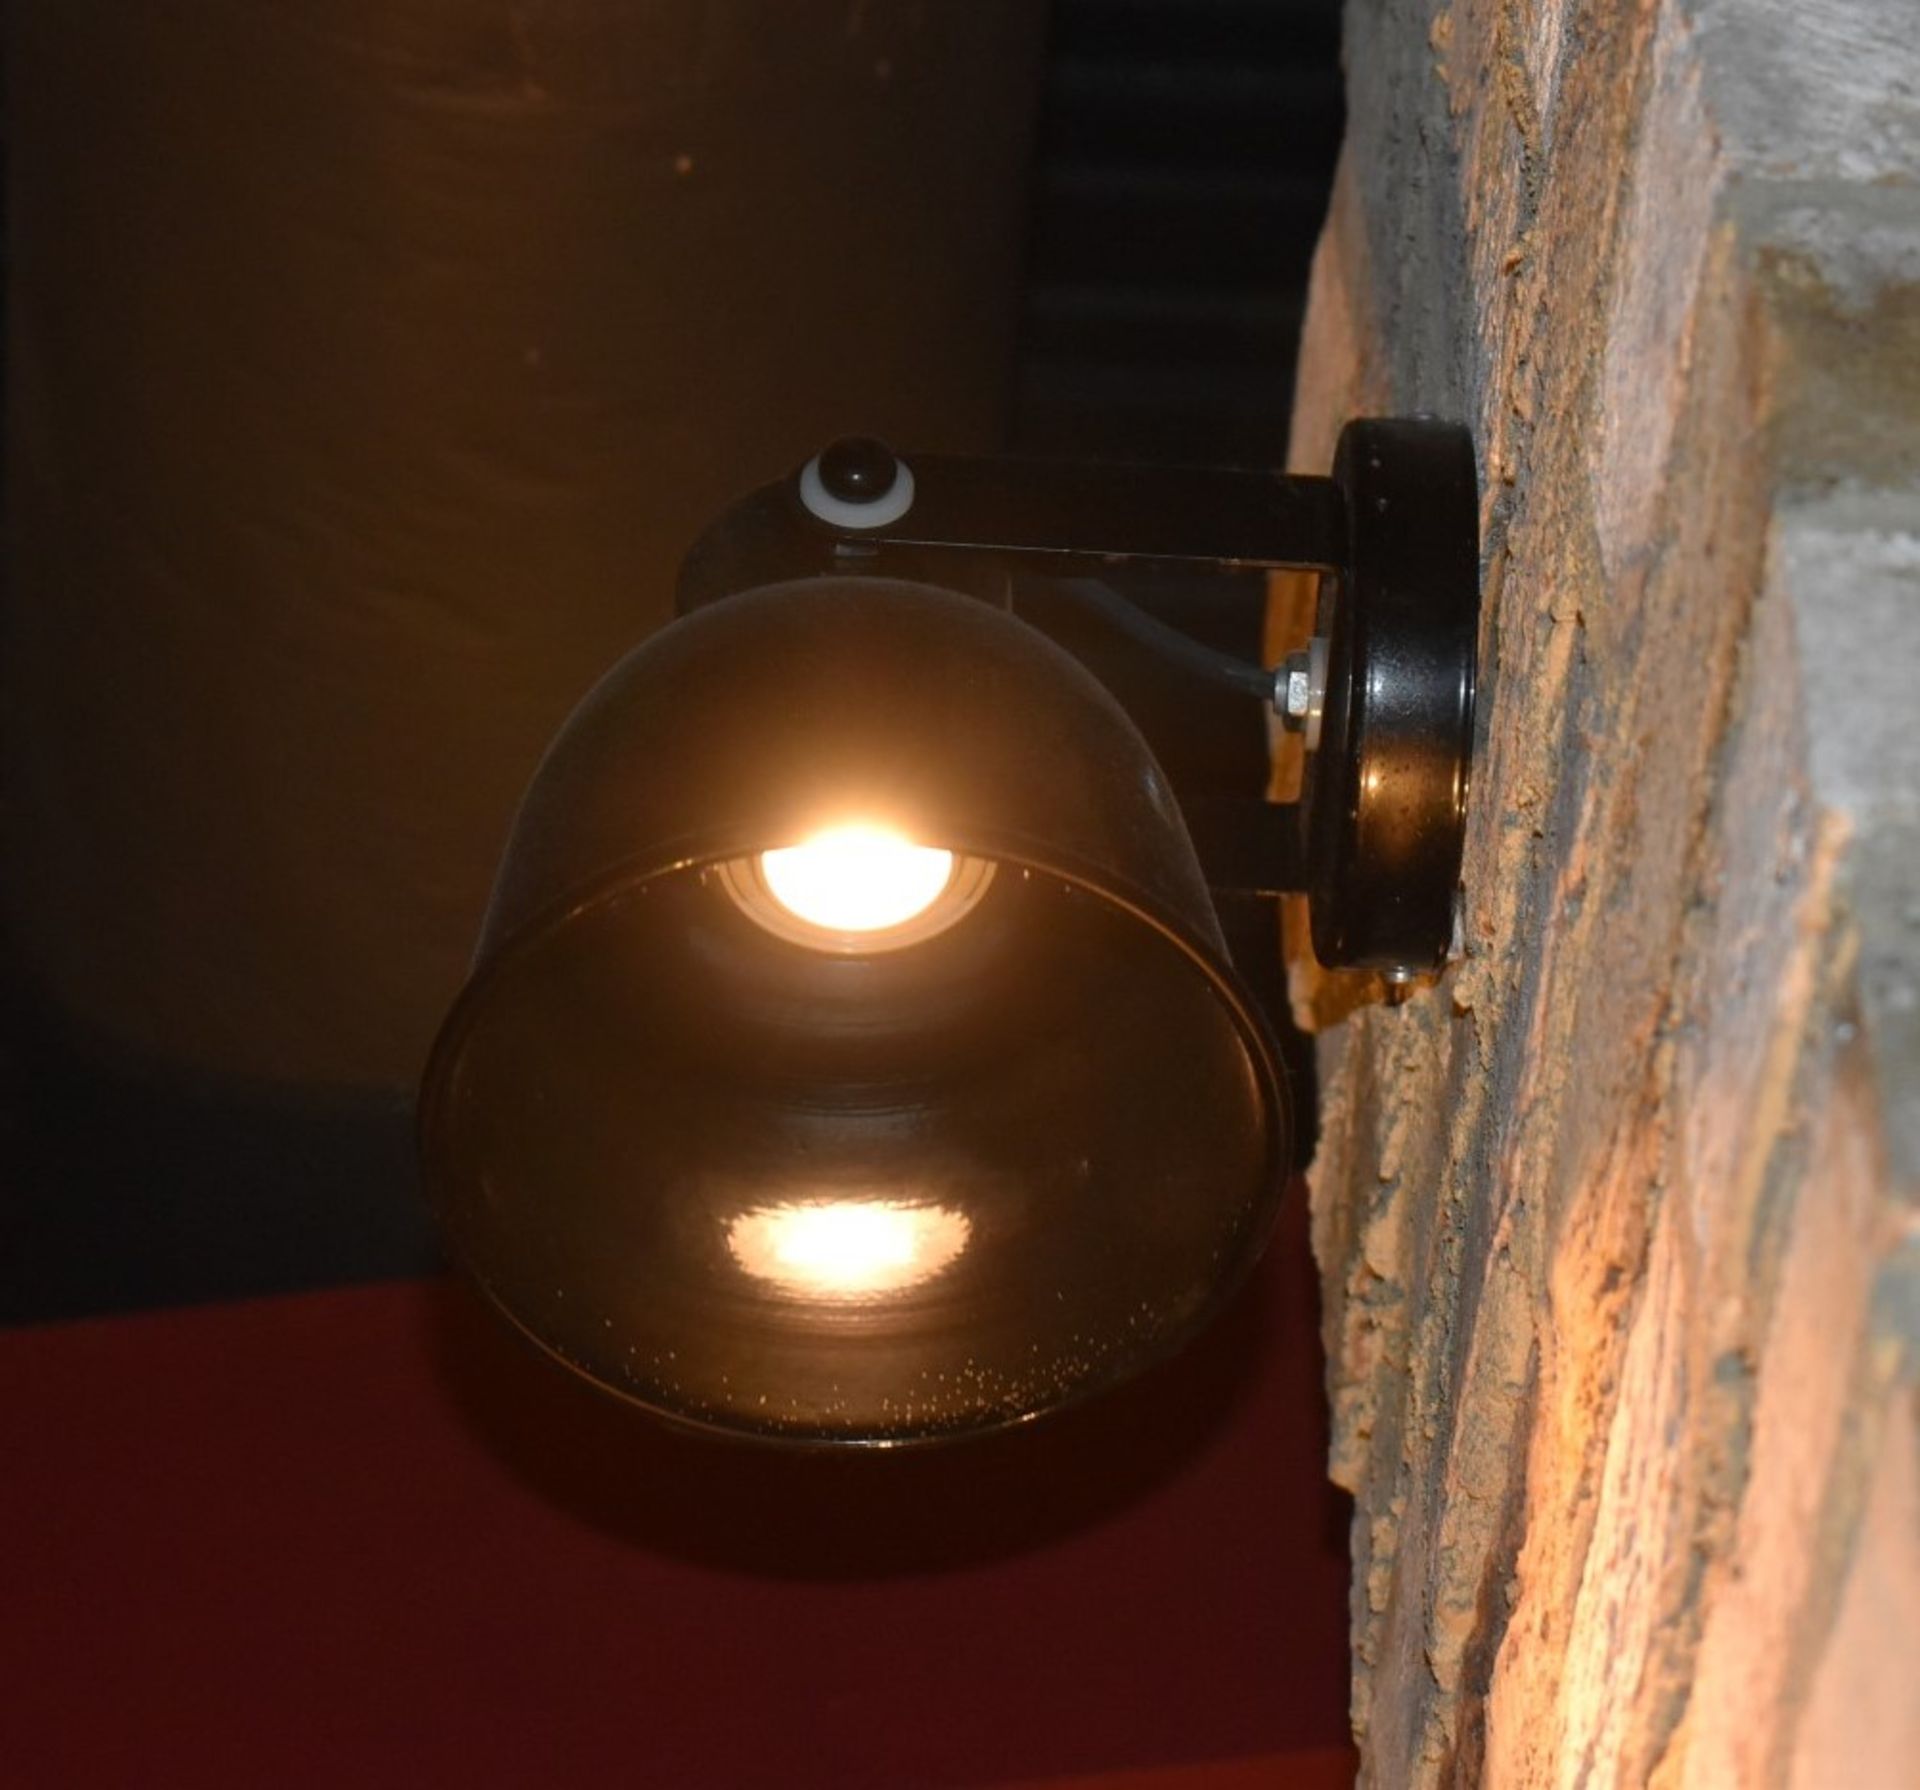 10 x Adjustable Spot Lights With a Black Finish - Image 3 of 5